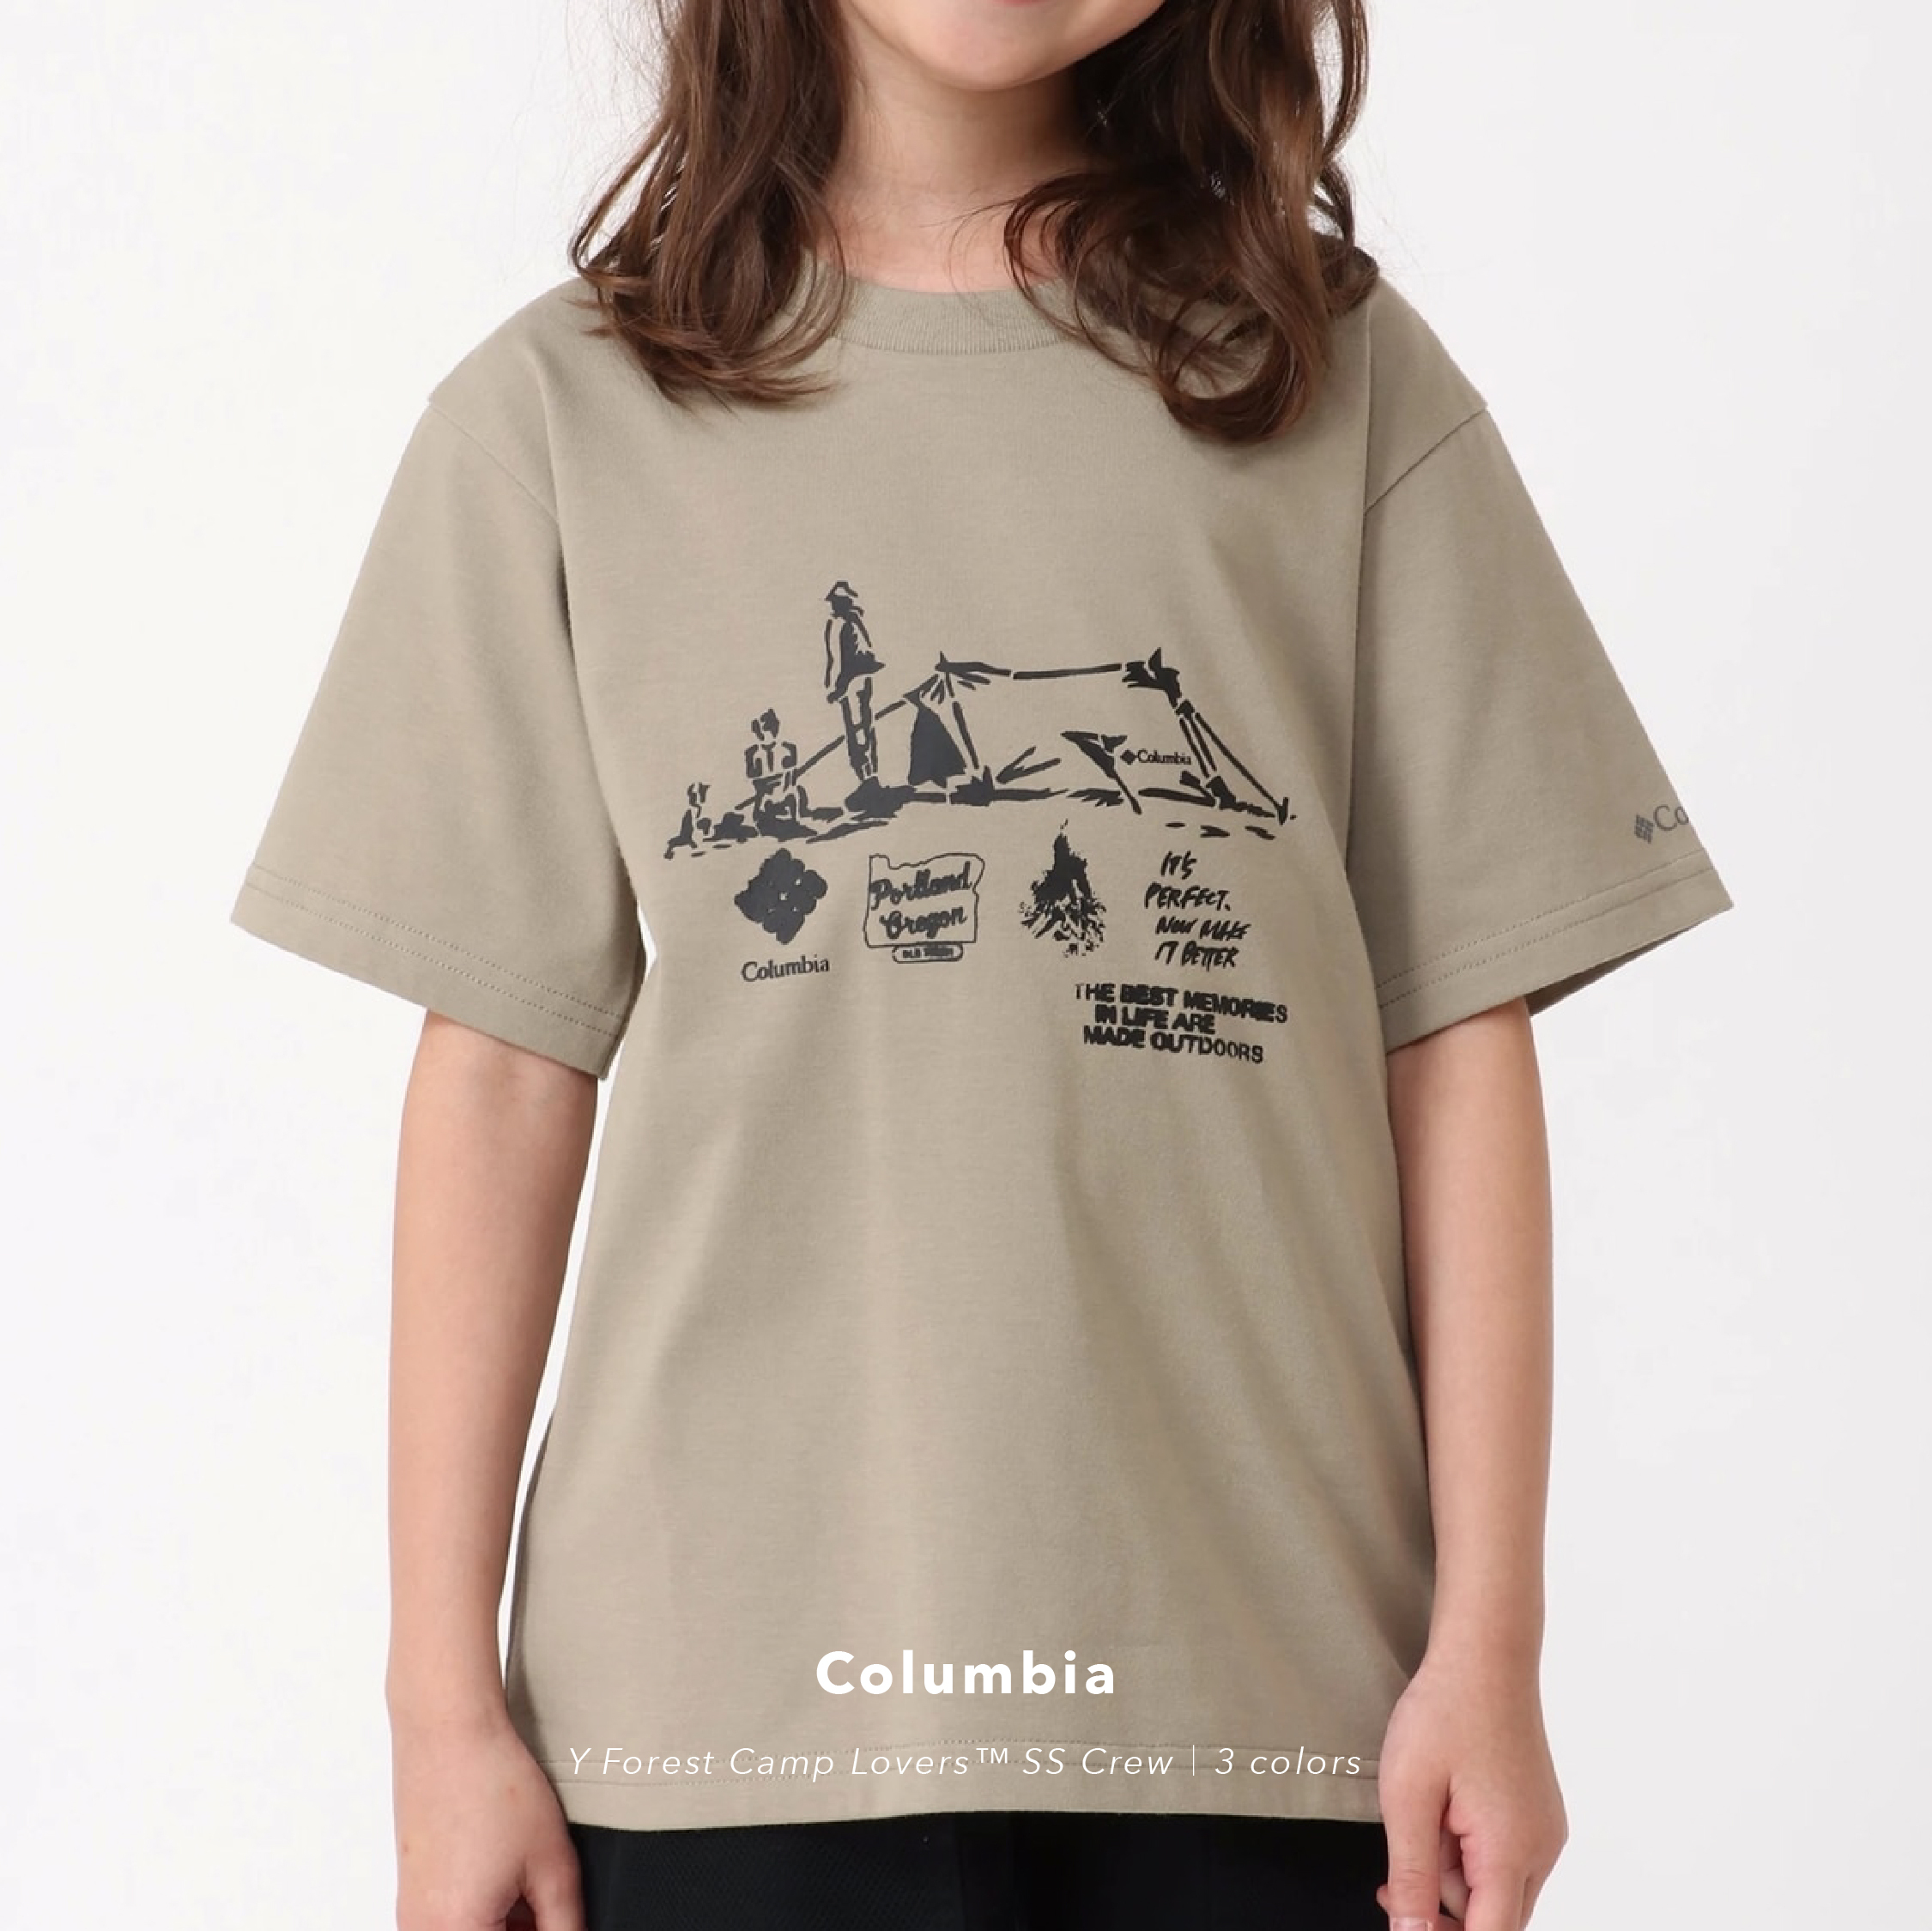 SANXI_商品圖｜Columbia_Columbia Y Forest Camp Lovers™ SS Crew